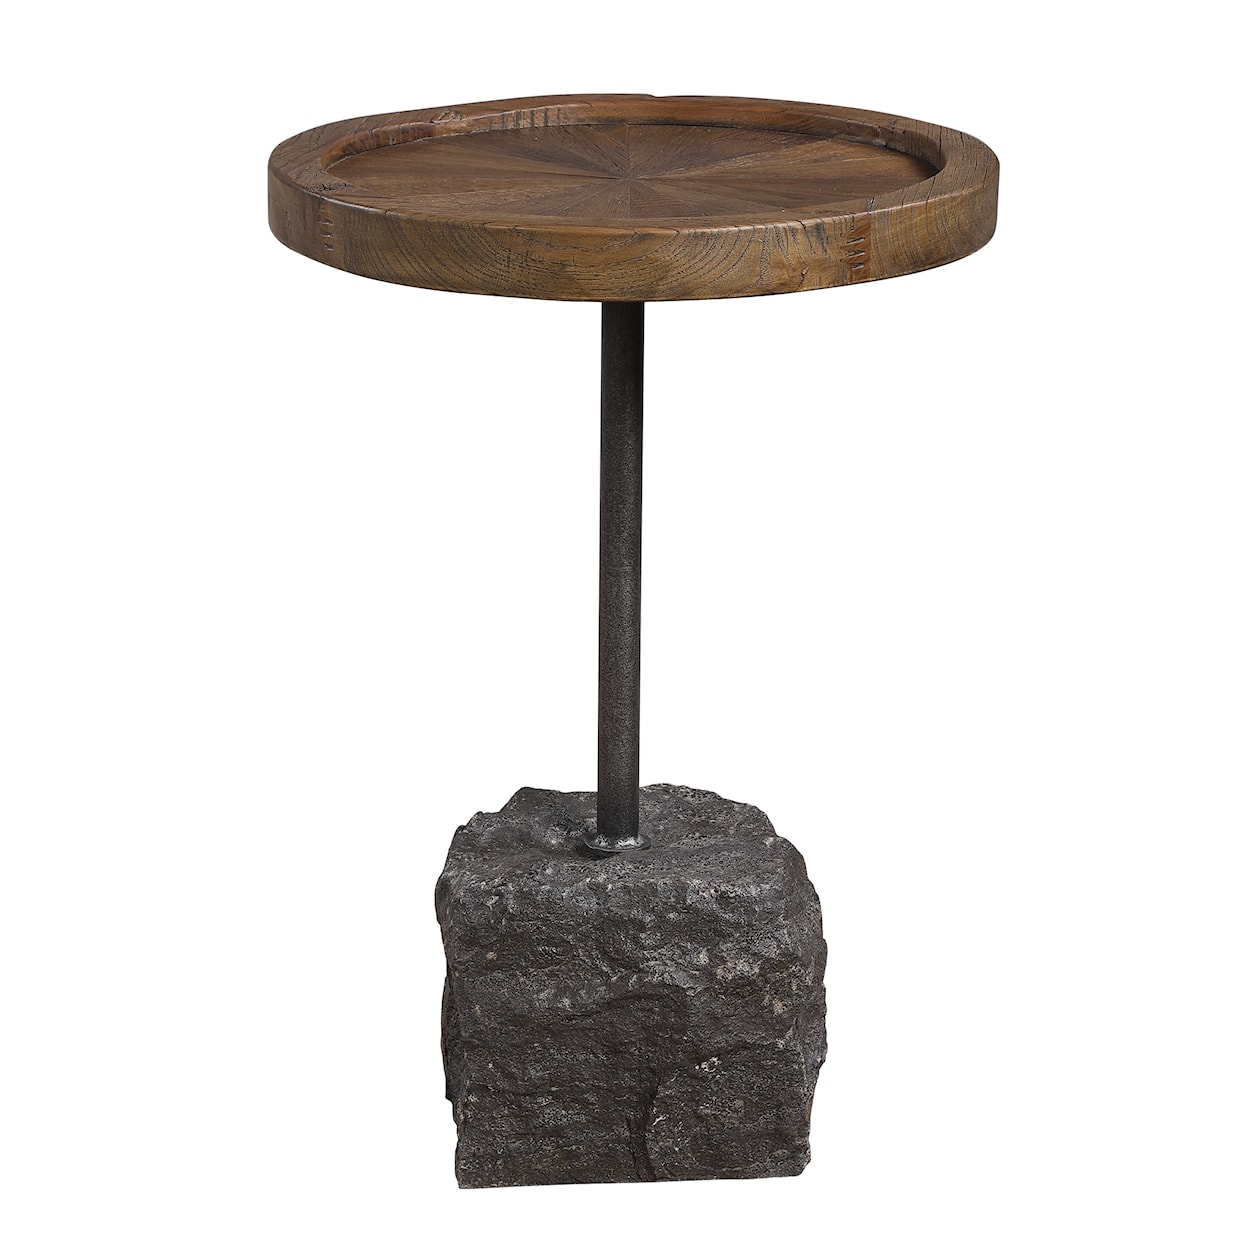 Uttermost Accent Furniture - Occasional Tables Horton Accent Table